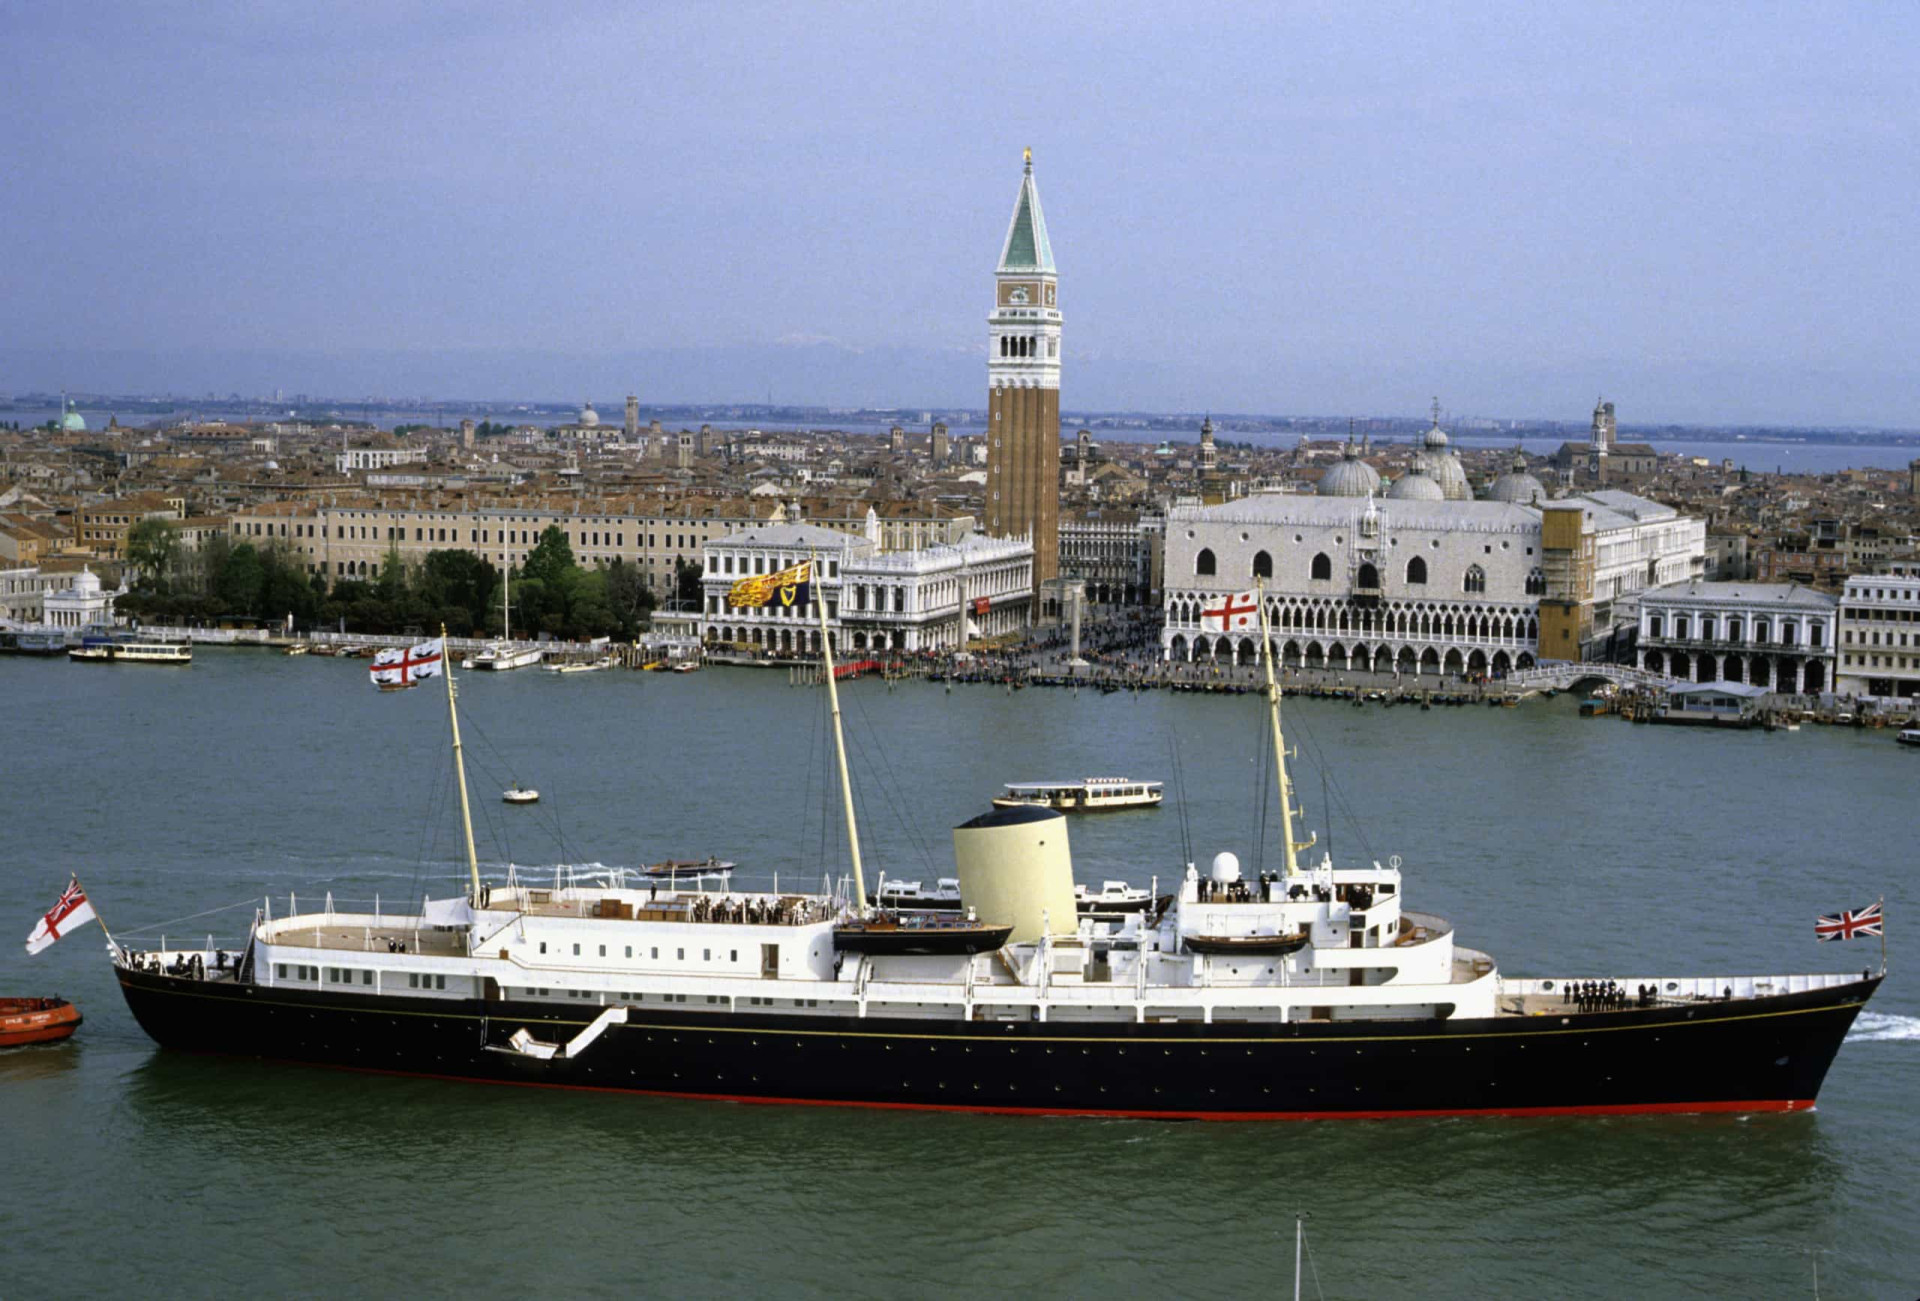 <p>Many Italians described the tour as a "second honeymoon" for the royal couple. Meanwhile, cities like Venice certainly provided a beautiful and historic backdrop for HMY <em>Britannia</em>.</p><p><a href="https://www.msn.com/en-us/community/channel/vid-7xx8mnucu55yw63we9va2gwr7uihbxwc68fxqp25x6tg4ftibpra?cvid=94631541bc0f4f89bfd59158d696ad7e">Follow us and access great exclusive content every day</a></p>